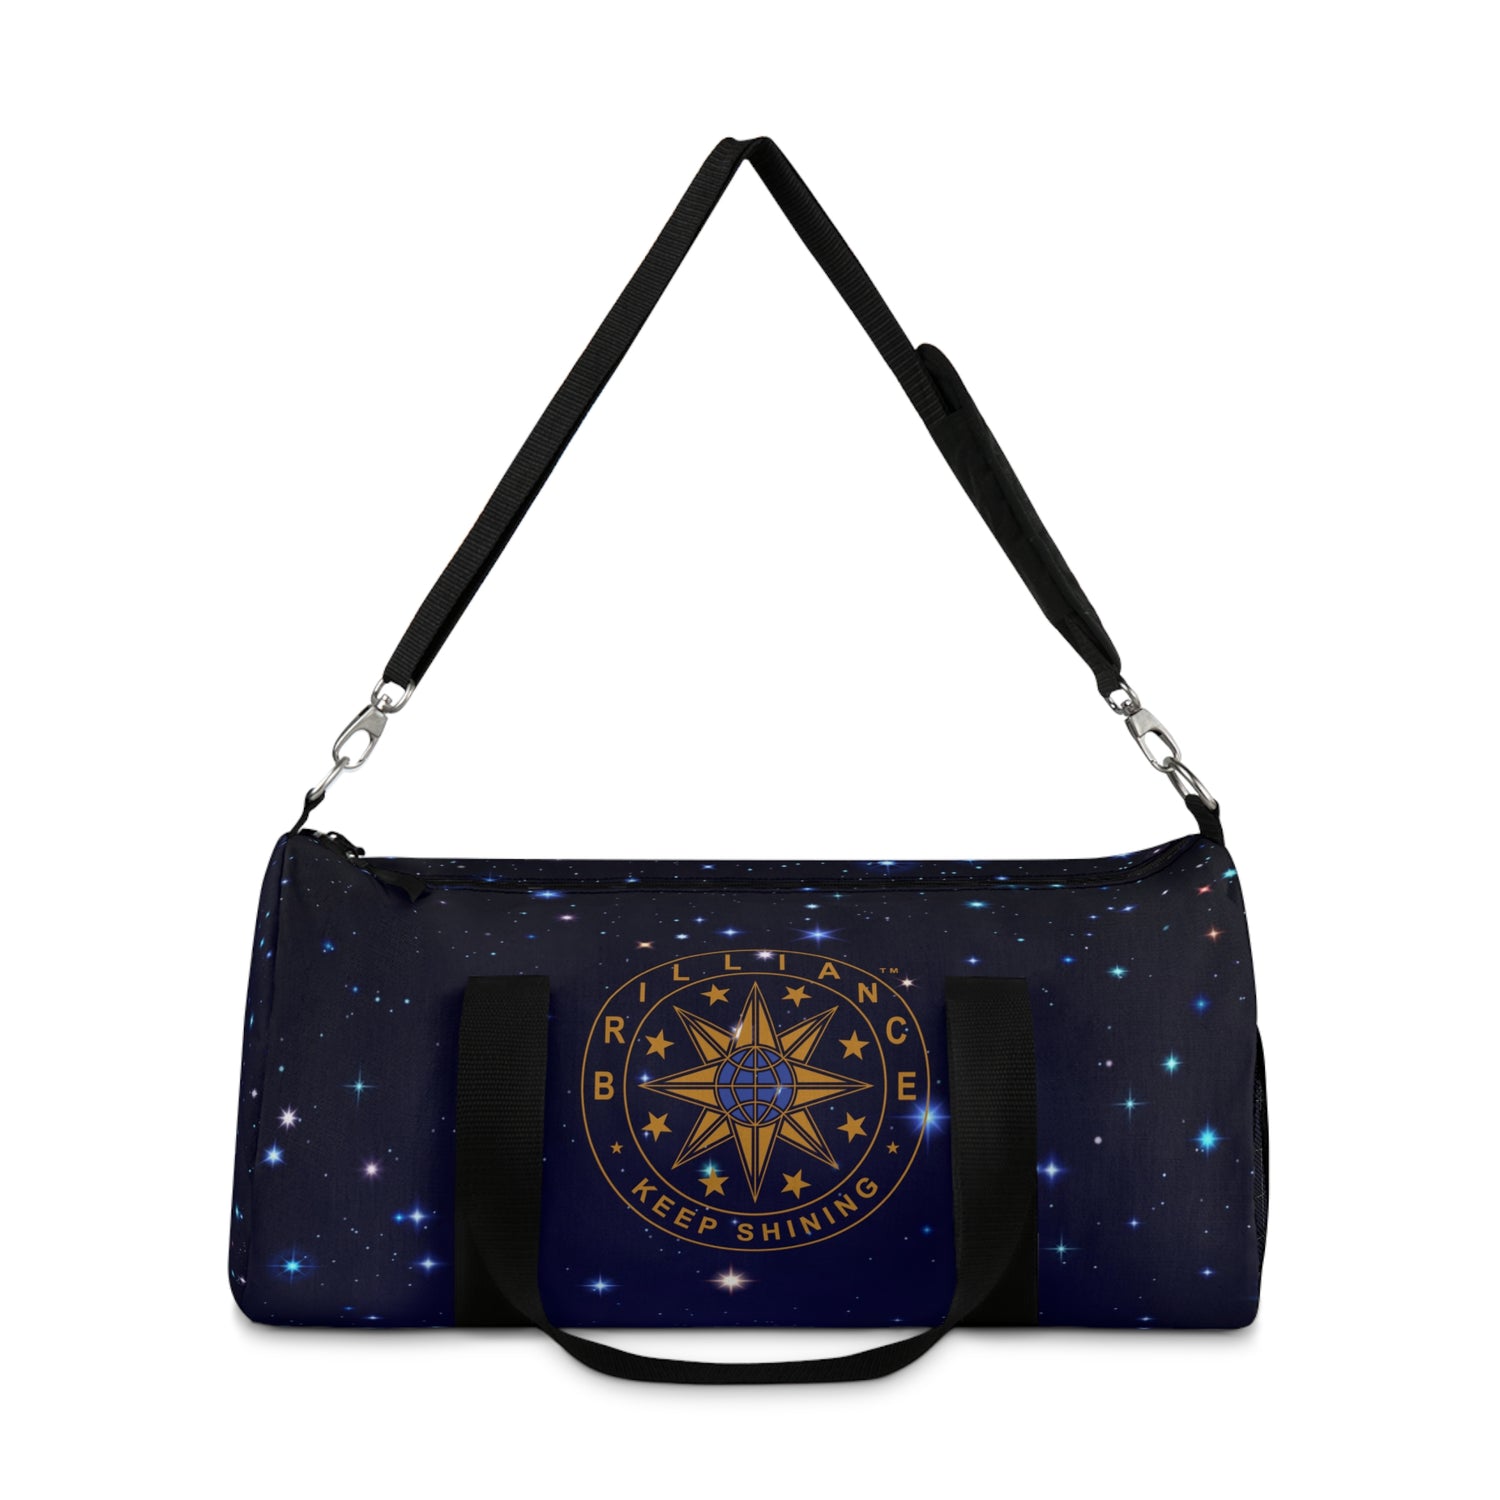 Brilliance Duffel Bag with Starry Night Print and Logo